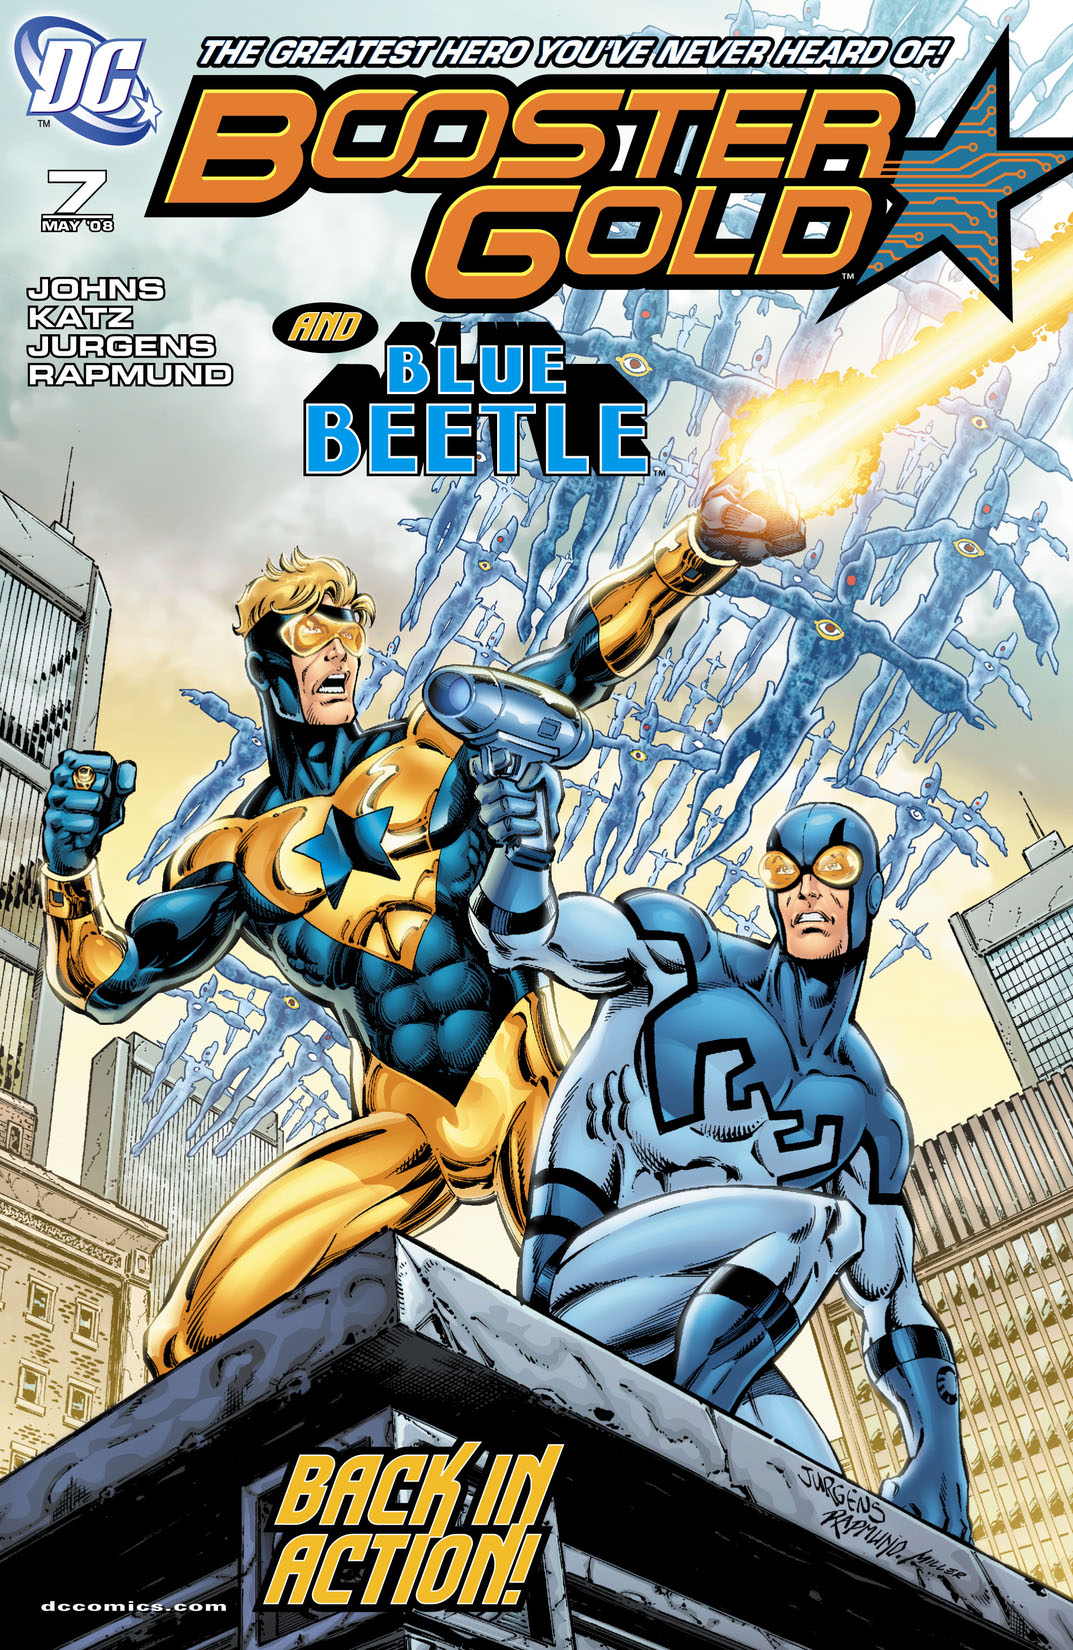 Booster Gold (2007-) #7 preview images